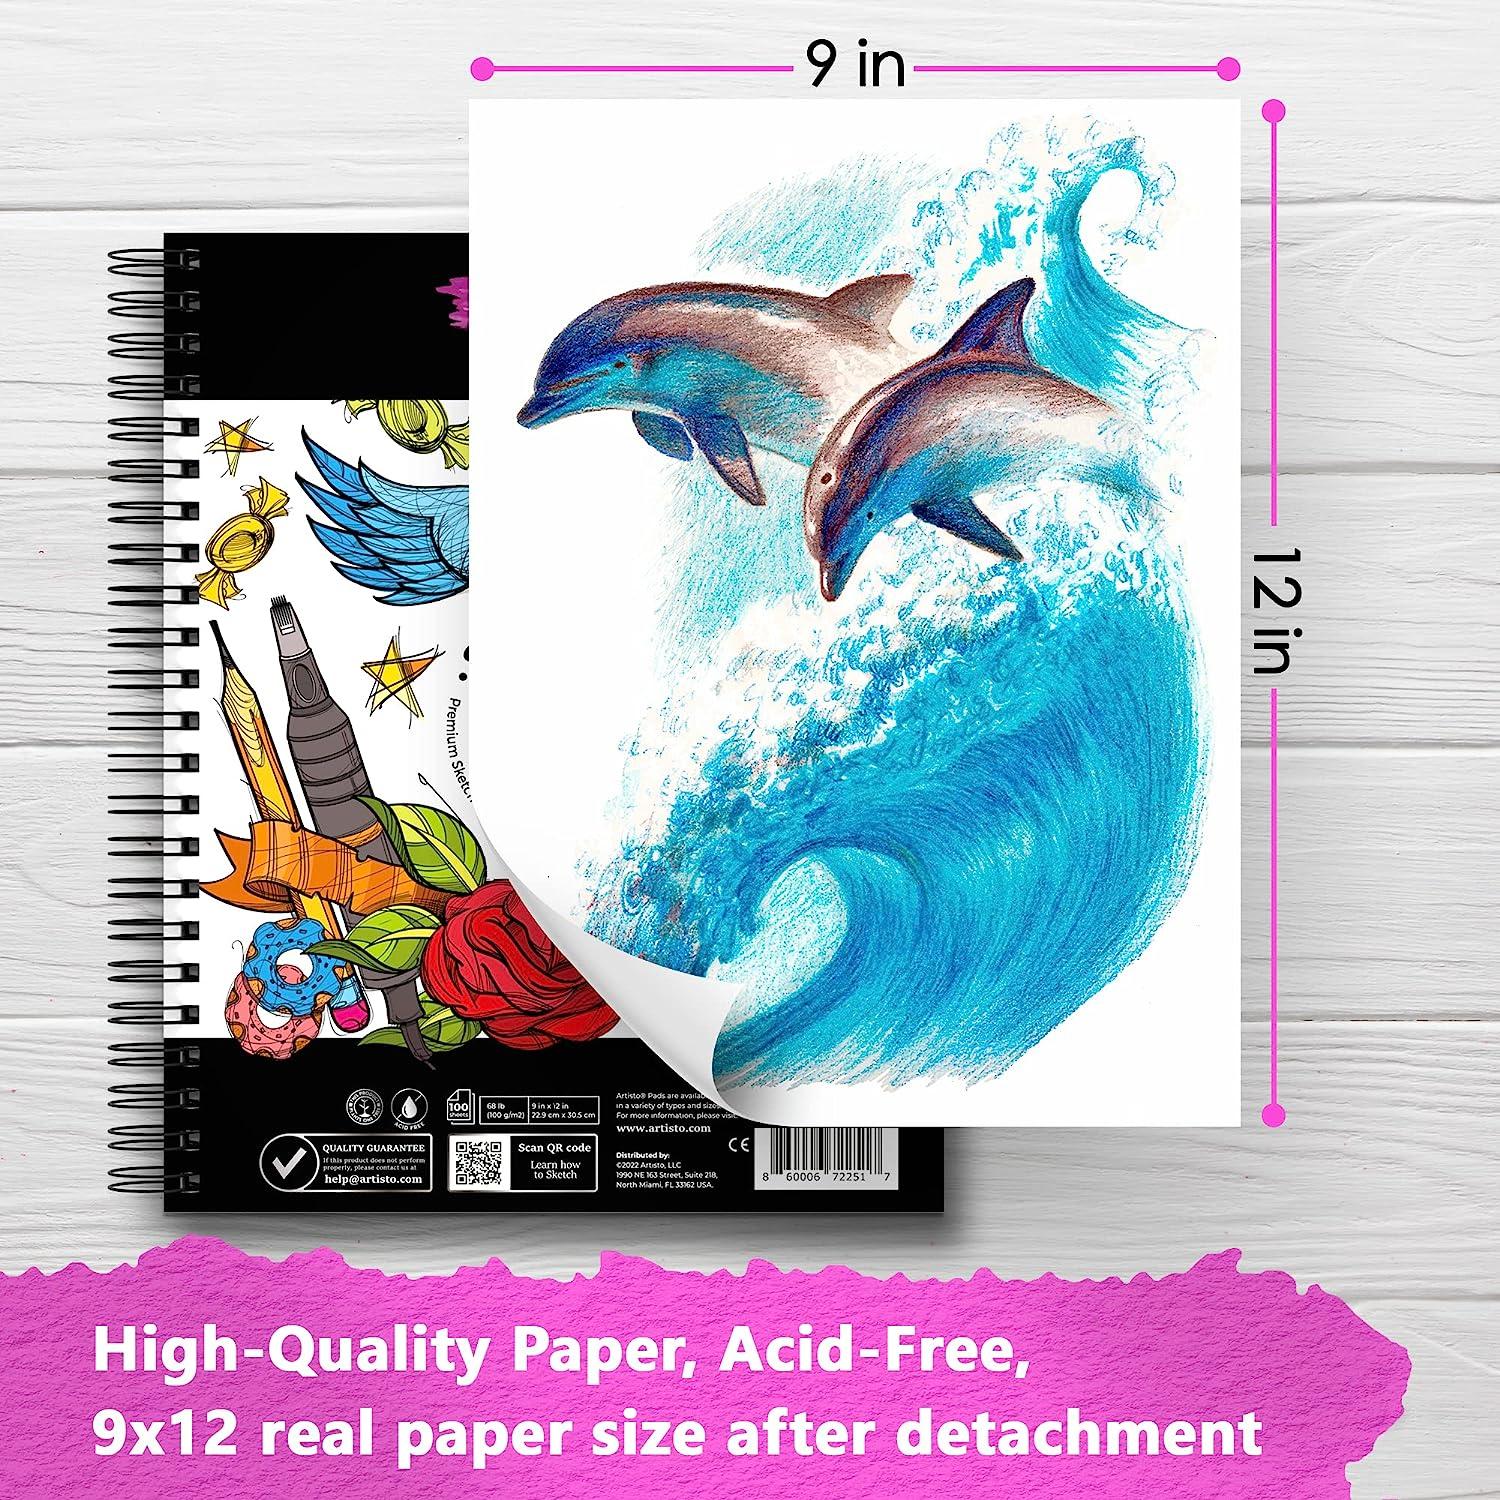 Artisto Watercolor Pads 9x12”, Pack of 2 (60 Sheets), Glue Bound, Acid-Free Paper, 140lb (300gsm), Perfect for Most Wet & Dry Media, Ideal for